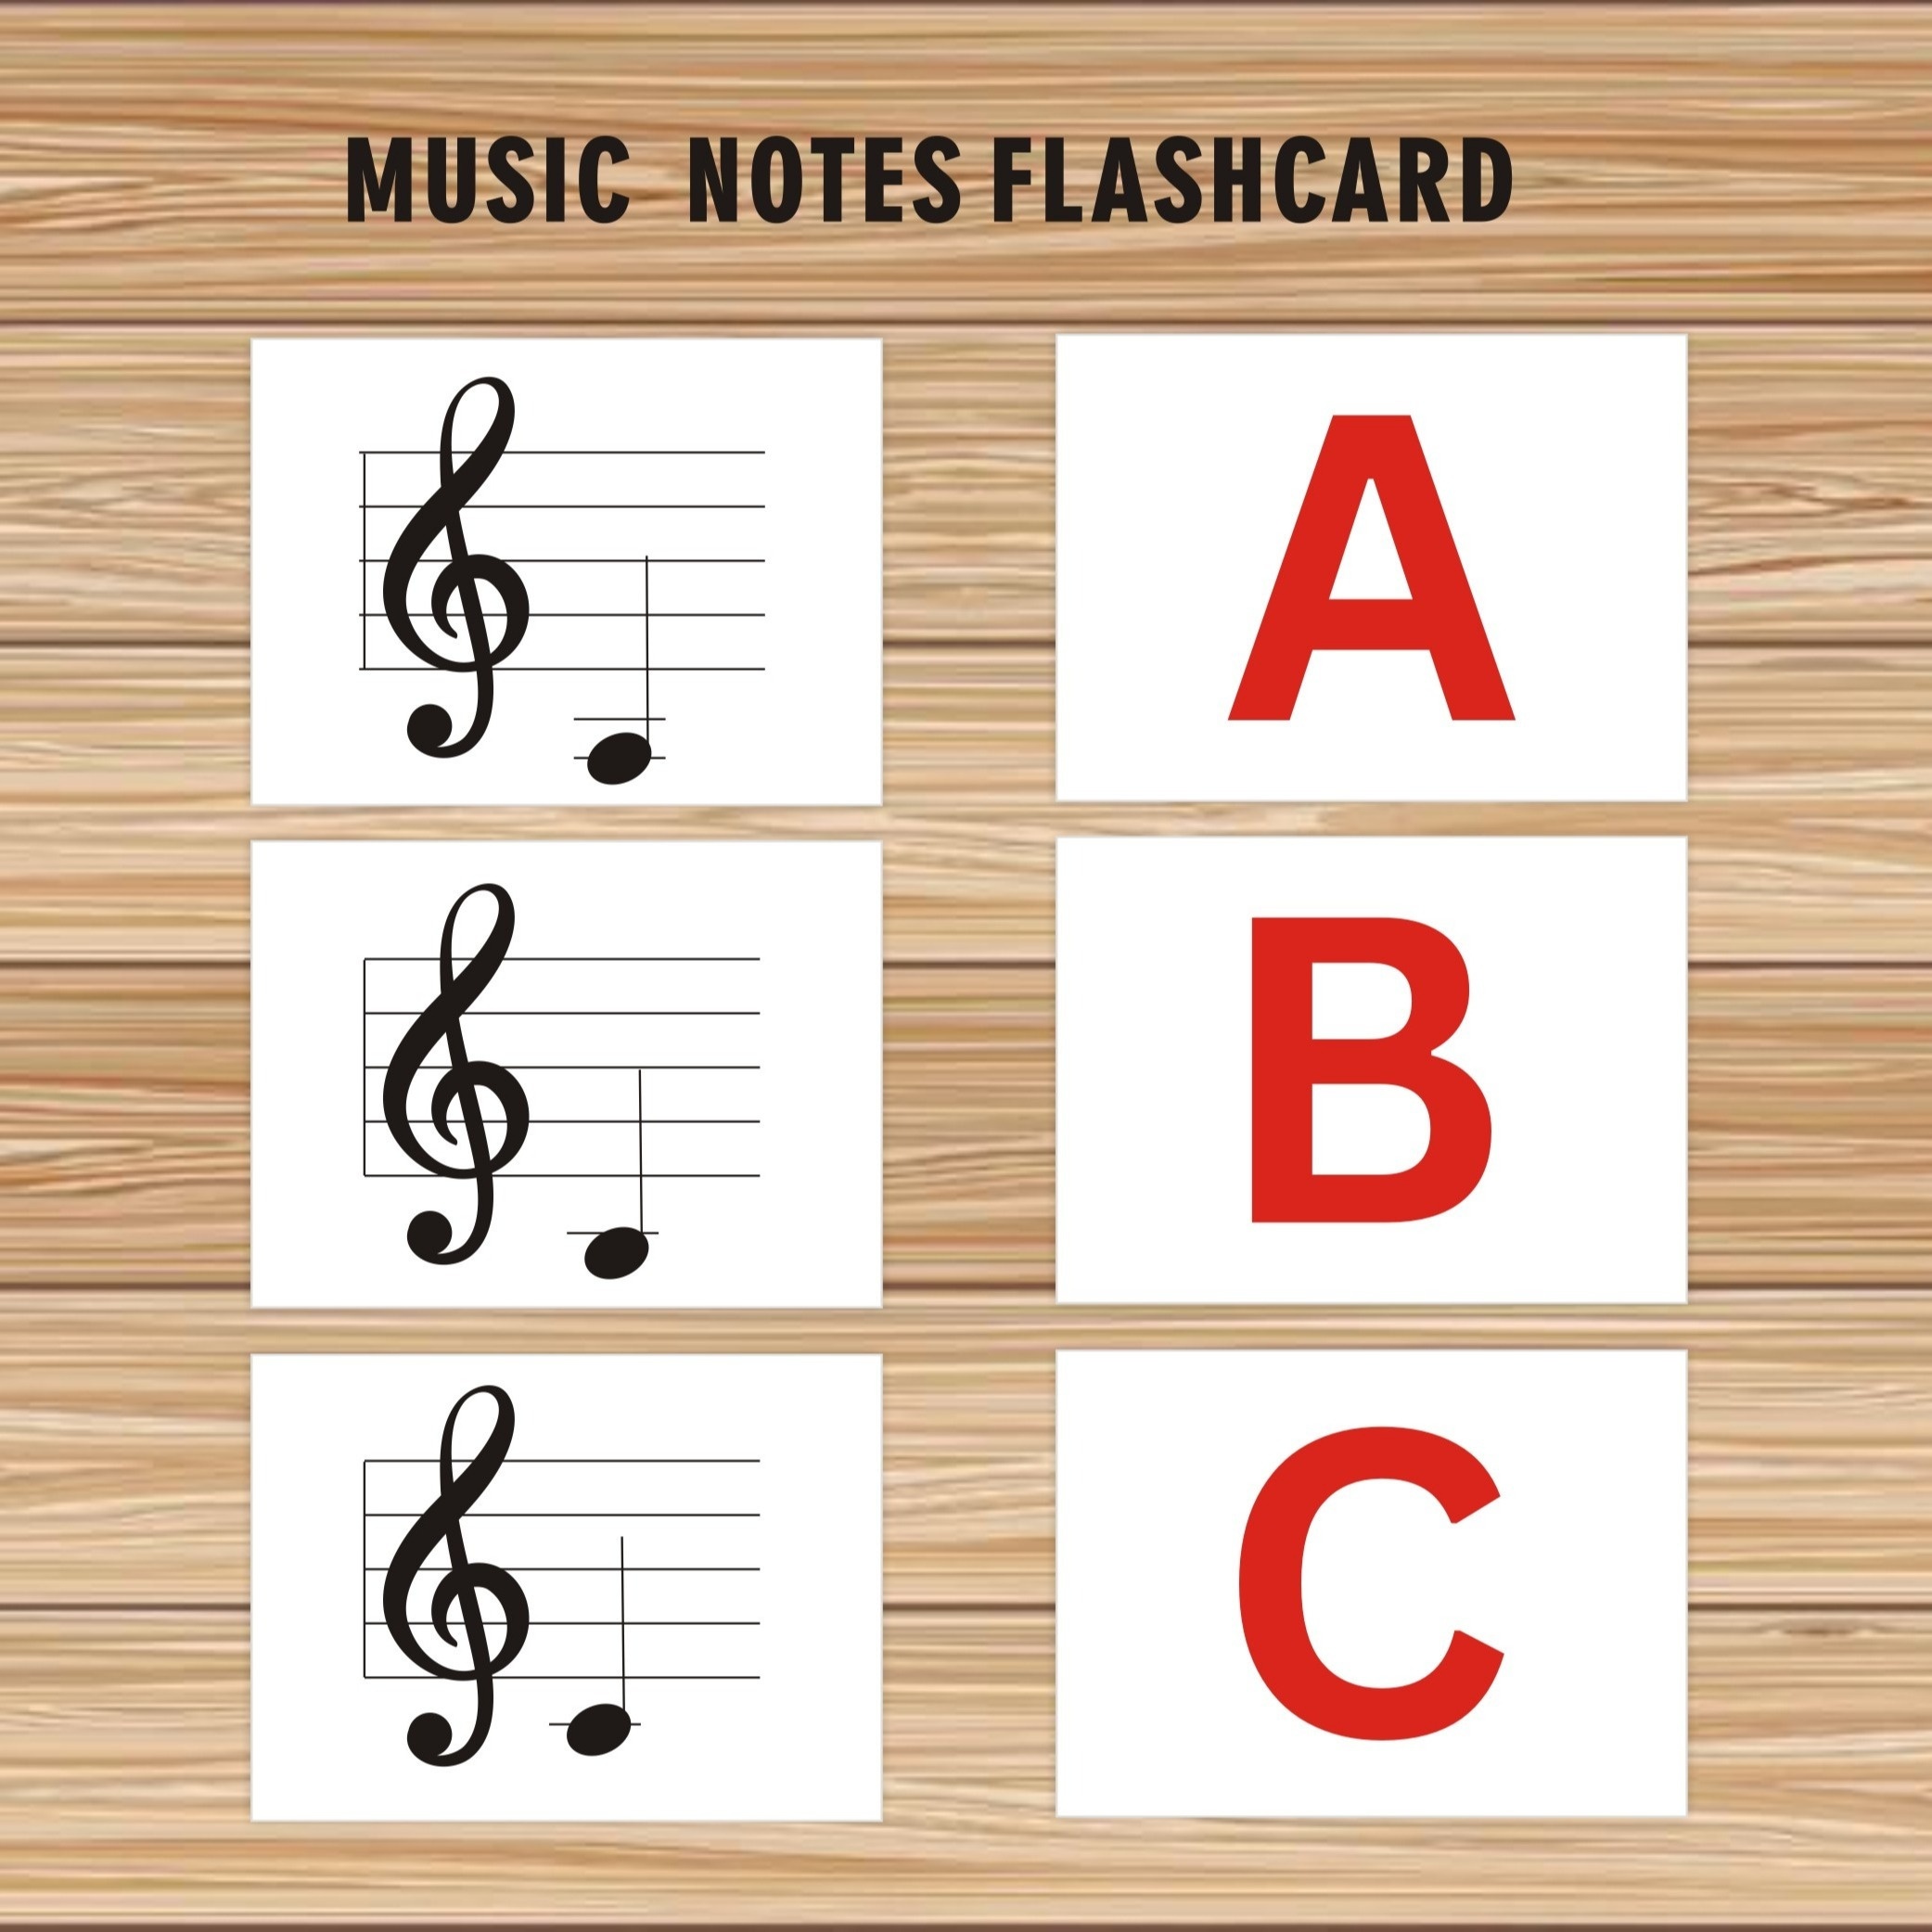 

Glossy Music Notes Flashcards Set, Educational Learning Tool For Musicians, English Language Music Theory Study Cards - Perfect Gift For Music Lovers